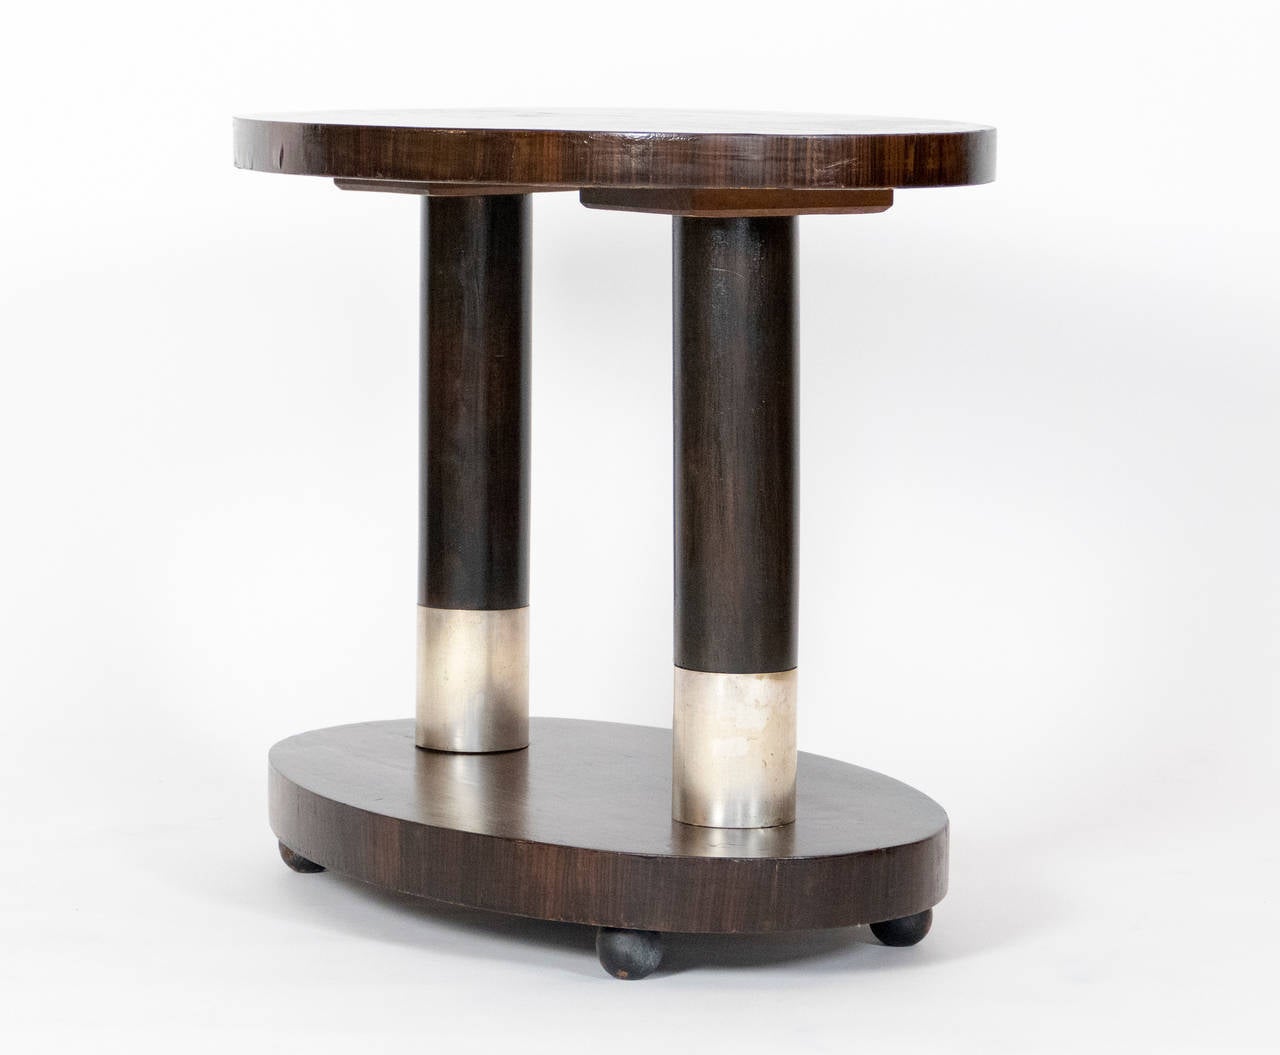 Small scale side table with Aluminum accents and veneered top.